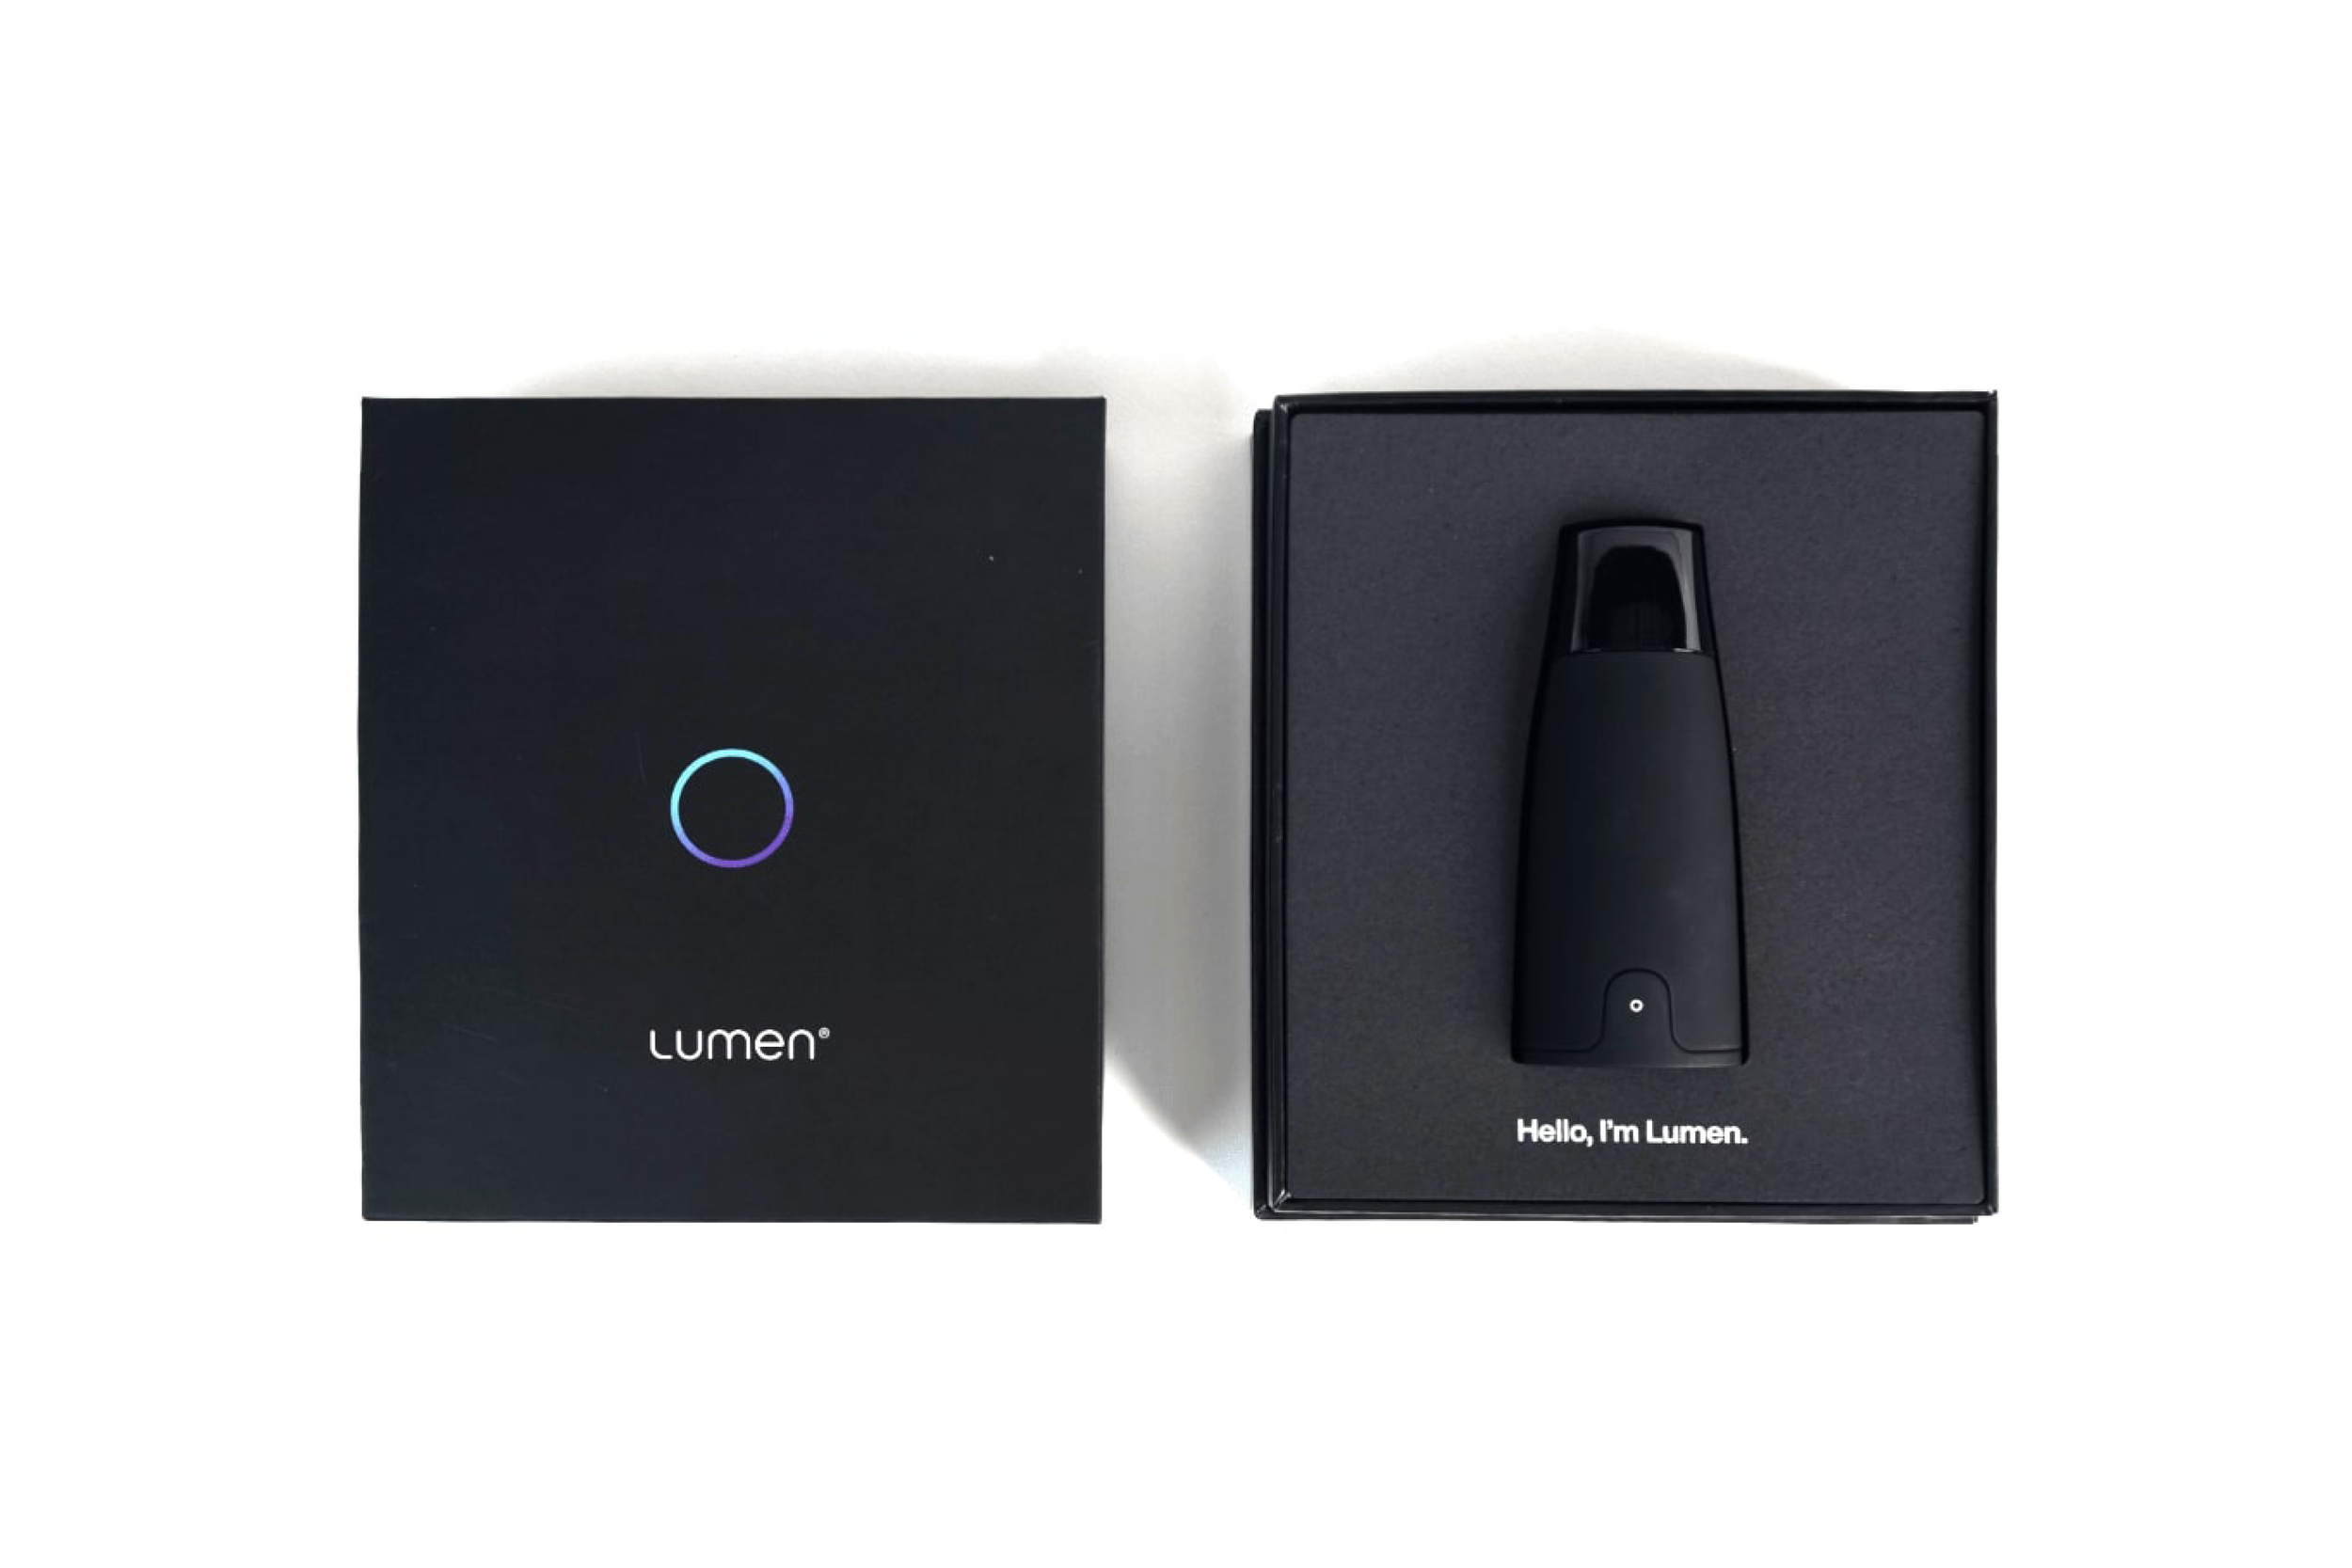 Lumen Metabolism Tracker: Your Personalized Nutrition Coach